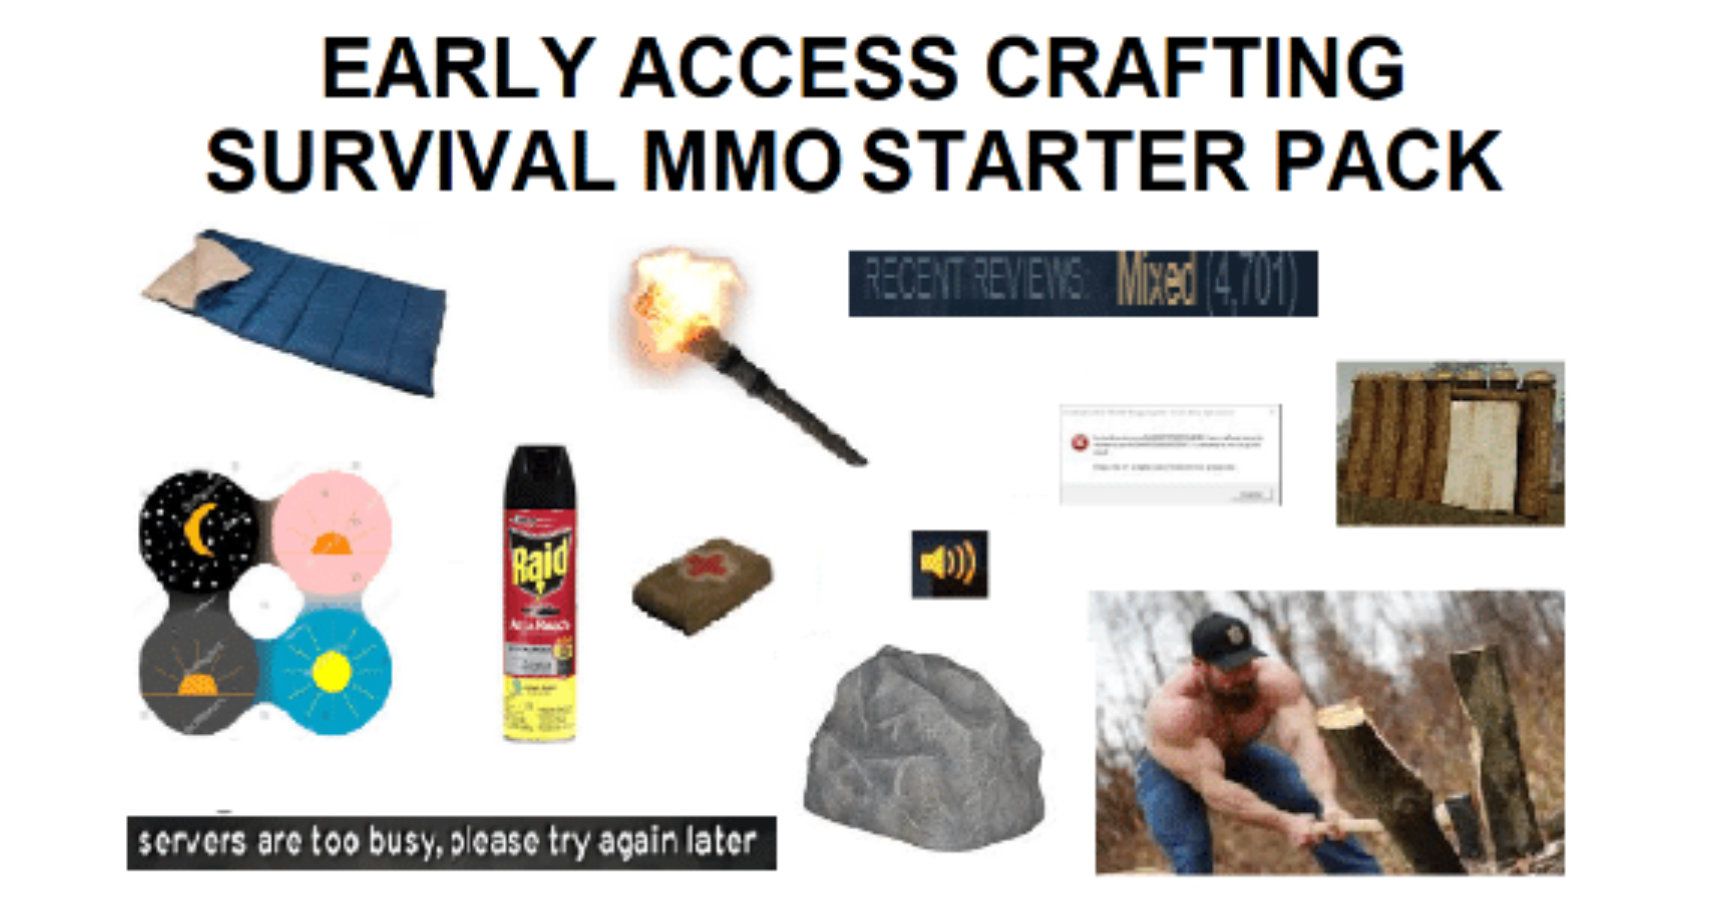 Early access survival crafting mmo starter pack. image includes sleeping bag, torch, bug spray, med kit, stone, axe, wood and servers are busy message.